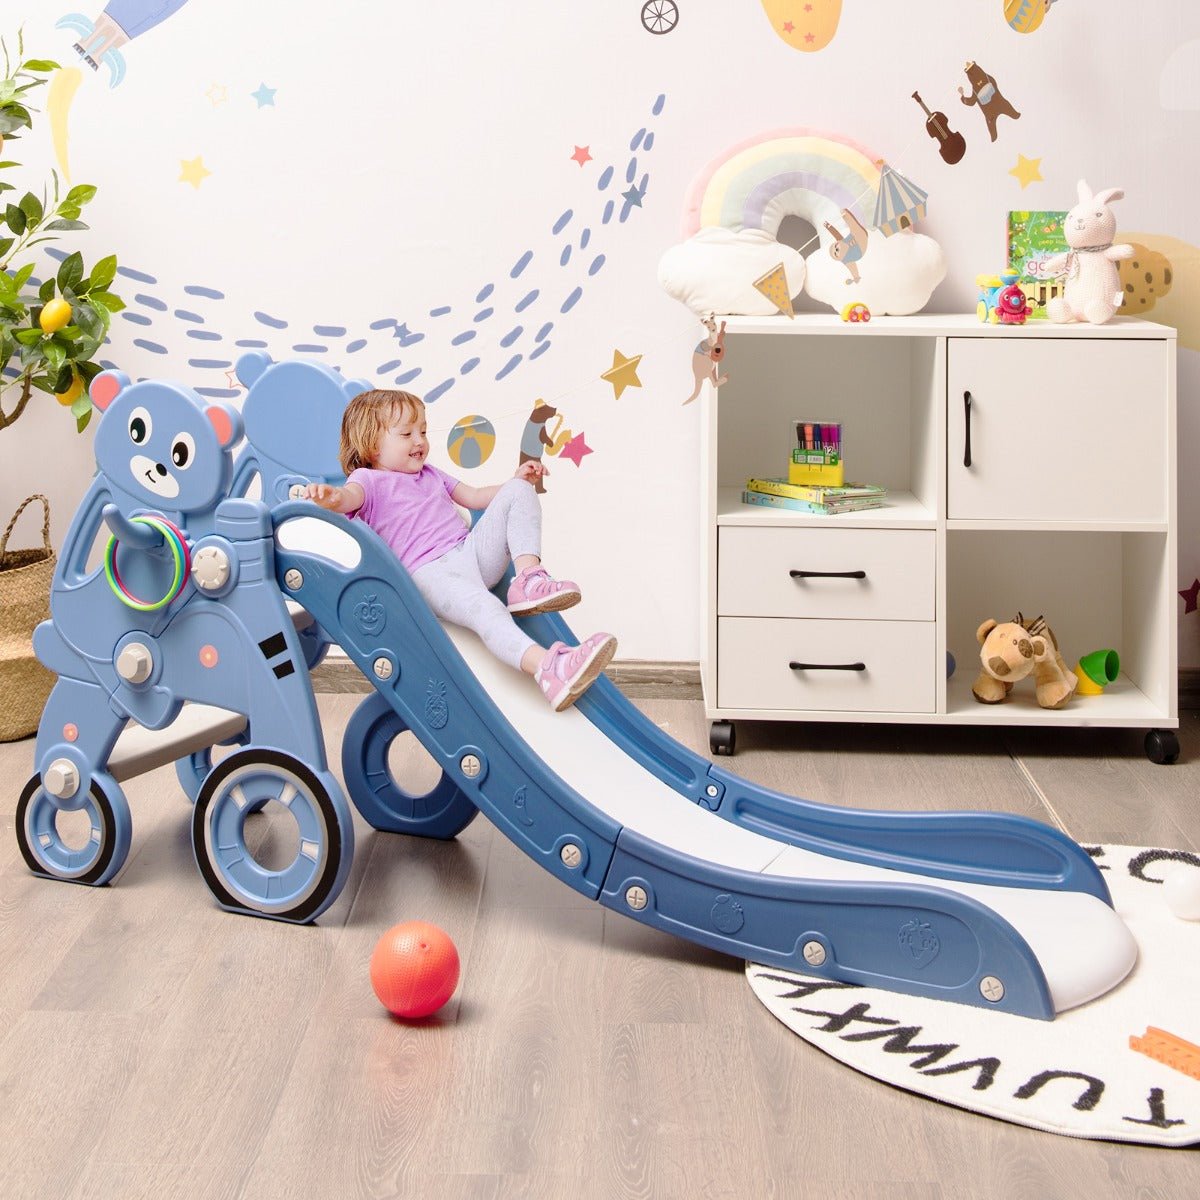 4-in-1 Bear Riding Foldable Baby Climber Slide Playset